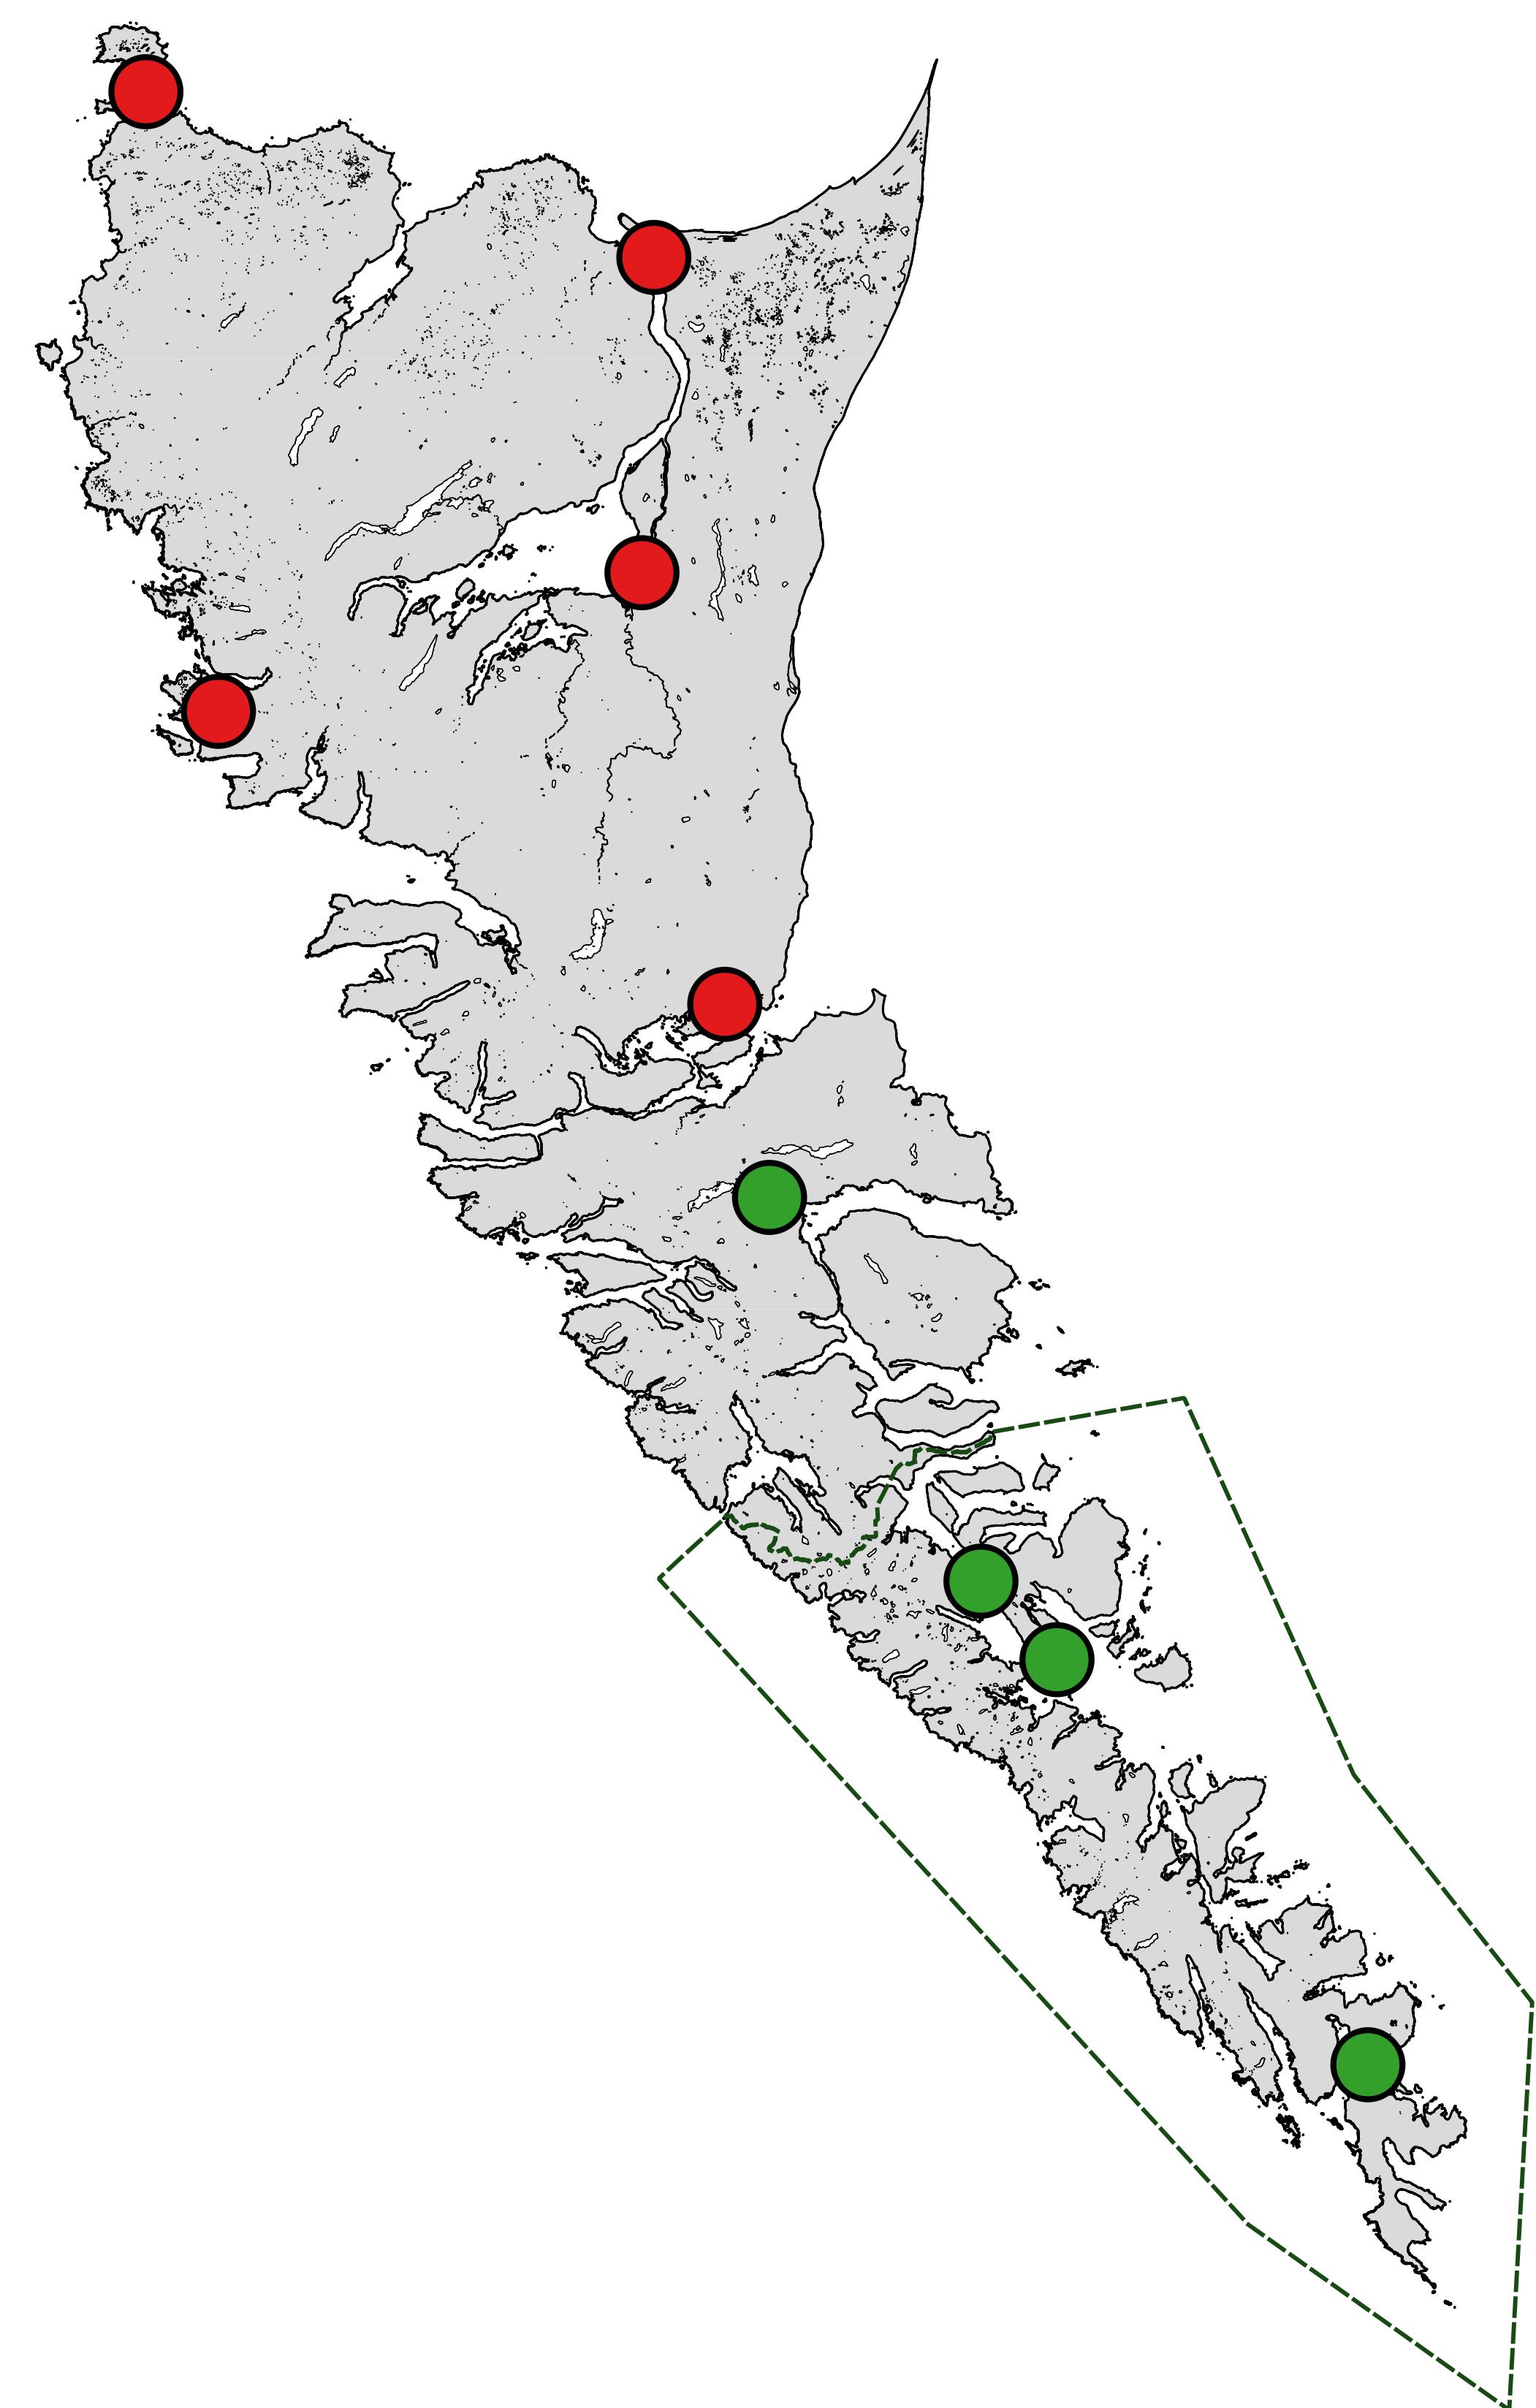 Map of settlement plate sites. The red dots represent sites put out and collected by HOTT/Haida Fisheries staff, while the green dots represent sites where settlement plates were put out and collected by Gwaii Haanas staff. Map credit: Haida Nation/Stu Crawford, Marine Planning.